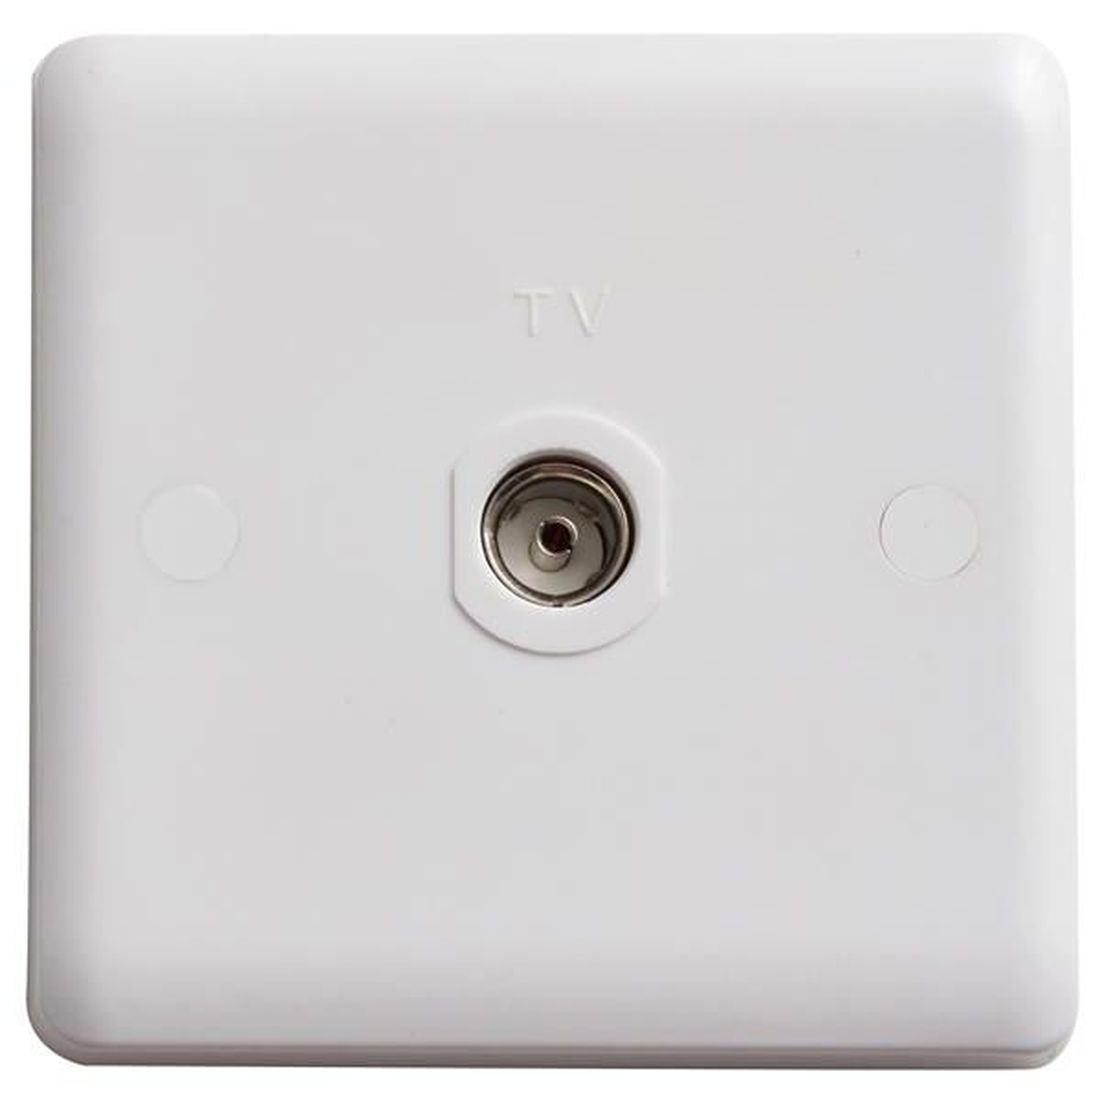 Deta Vimark Single Isolated Co-Axial Outlet   